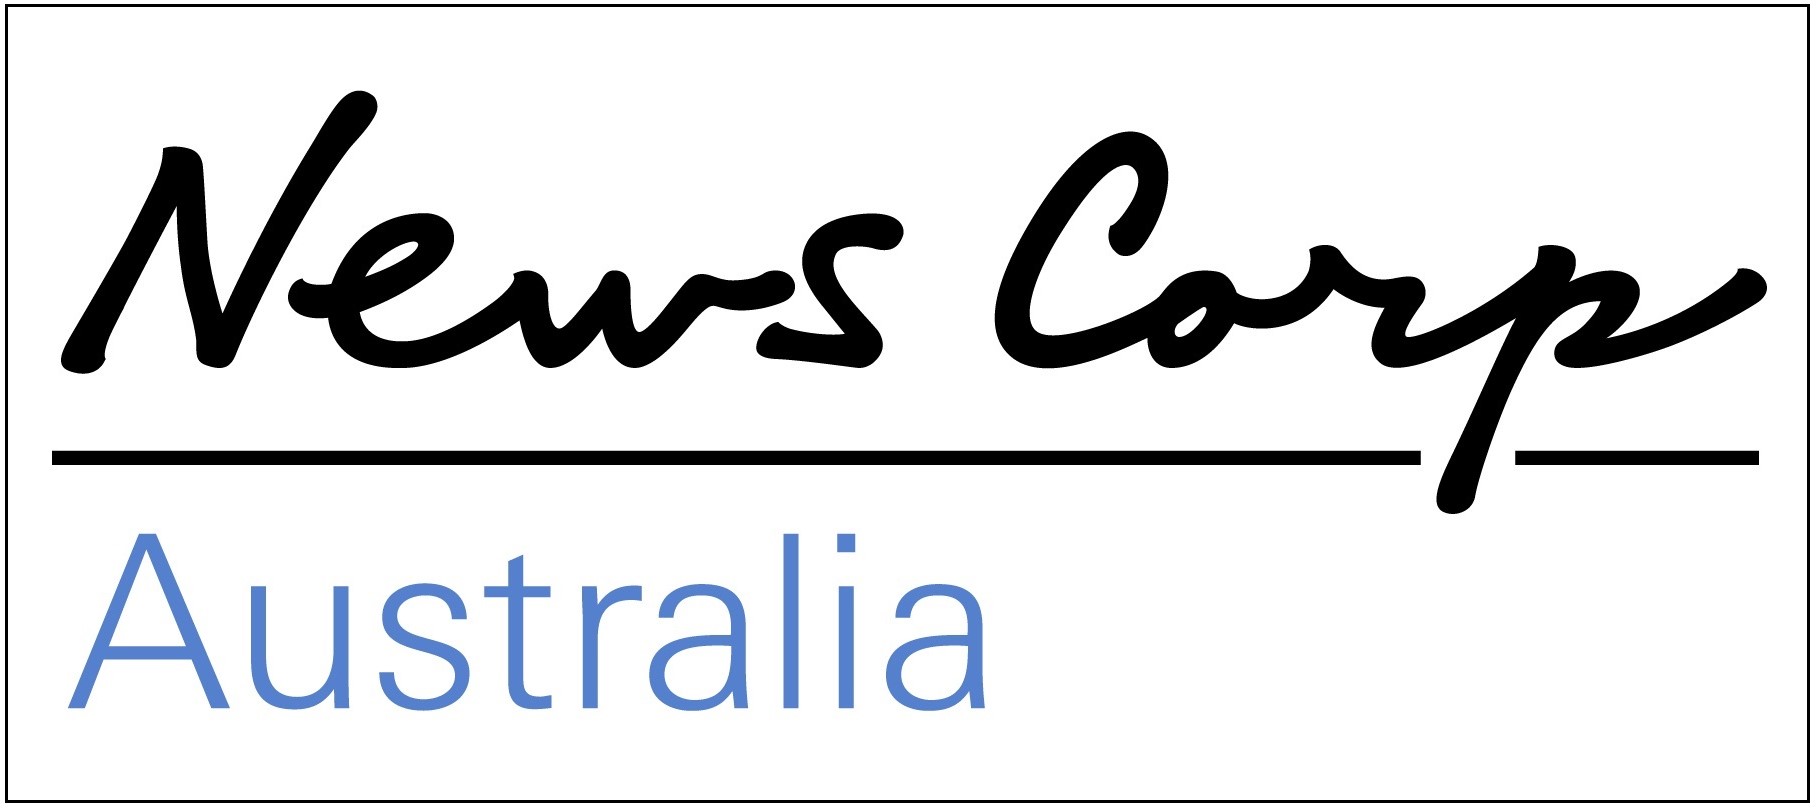 Regular meetings with News Corp Australia continue to resolve problems